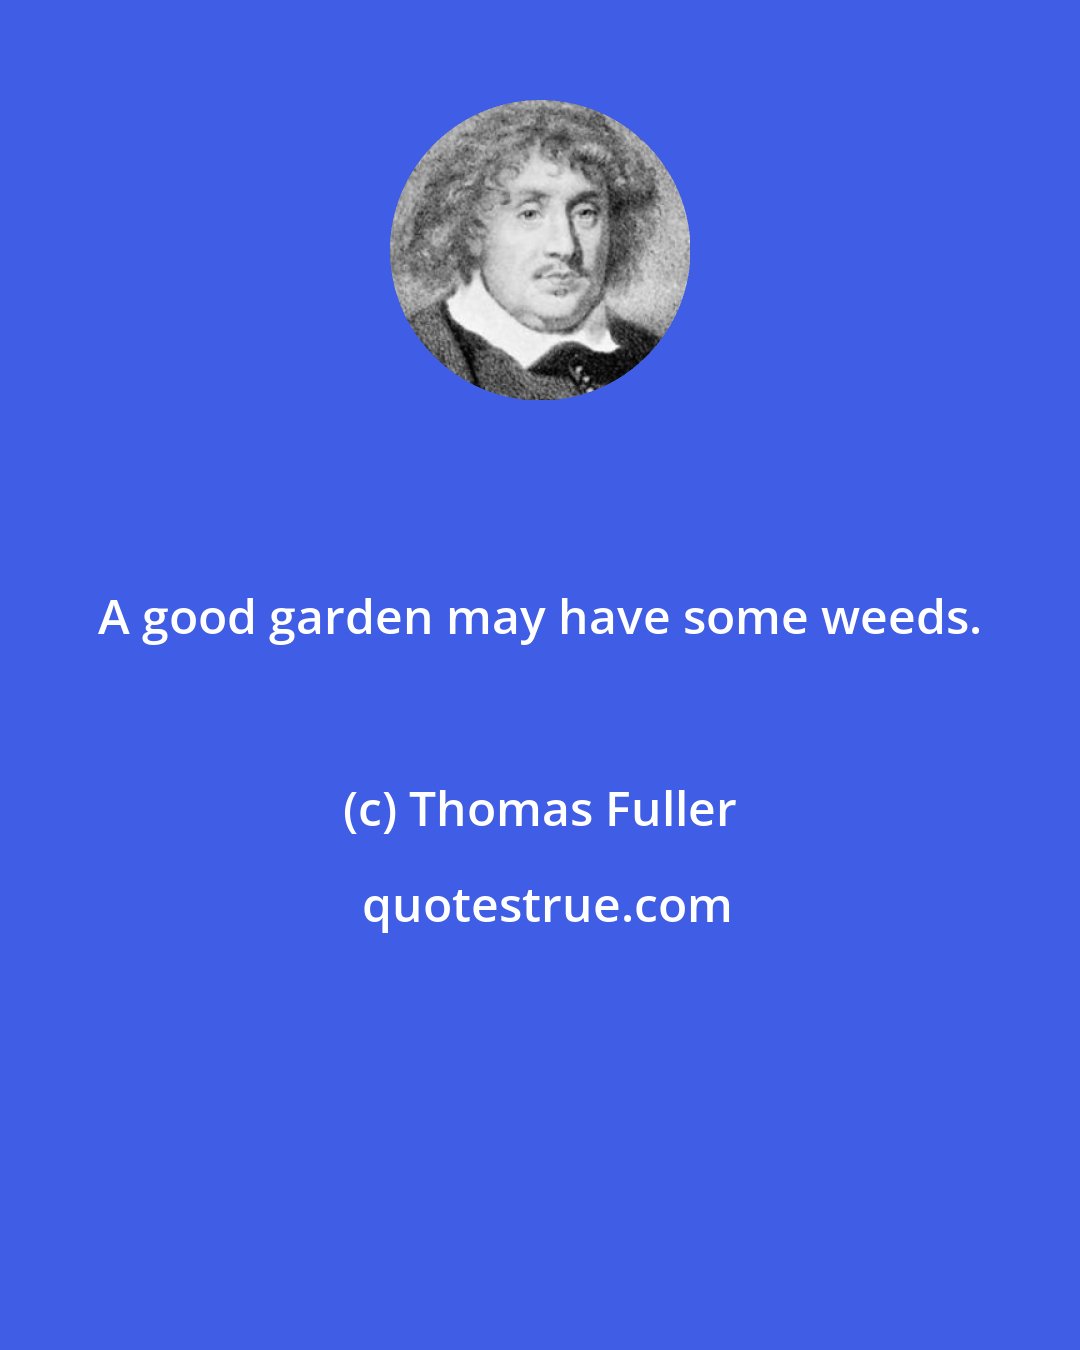 Thomas Fuller: A good garden may have some weeds.